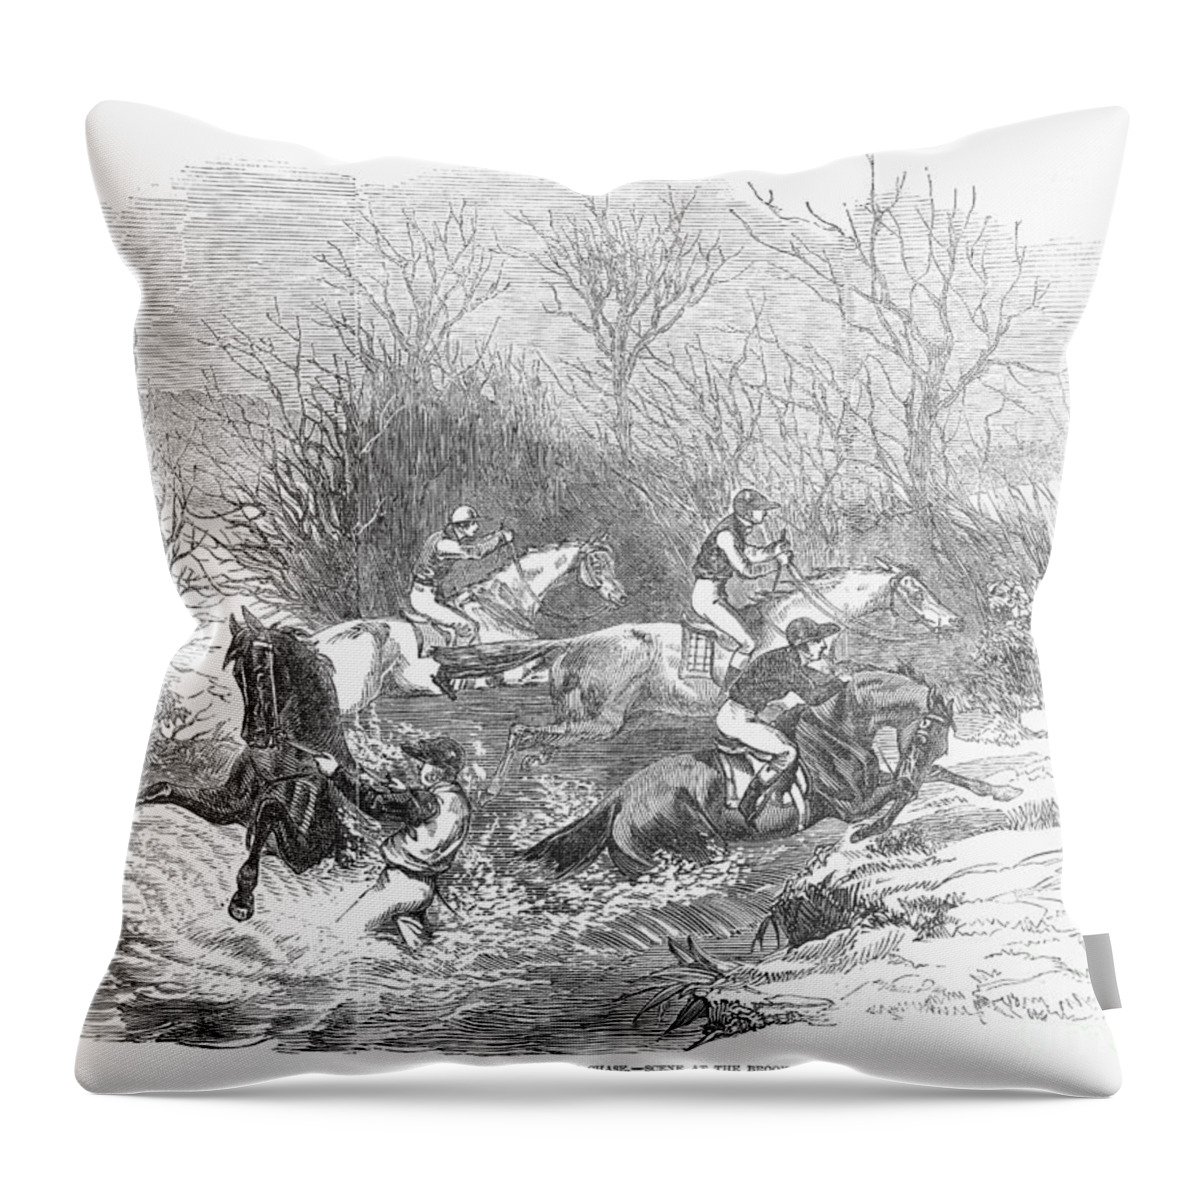 1847 Throw Pillow featuring the photograph Steeplechase, 1847 by Granger